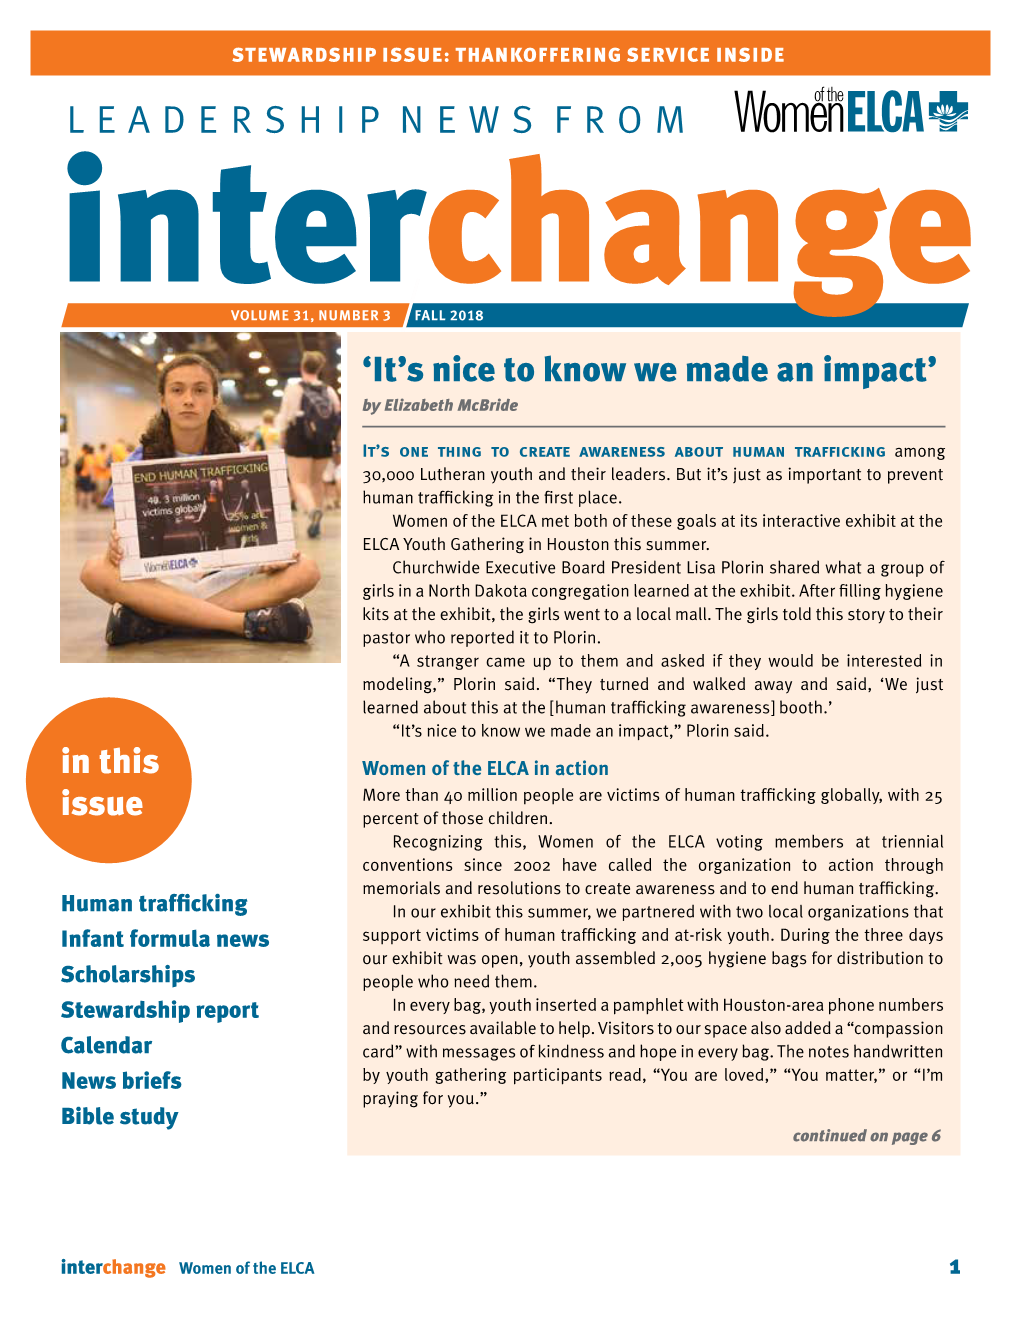 LEADERSHIP NEWS from Interchange VOLUME 31, NUMBER 3 FALL 2018 ‘It’S Nice to Know We Made an Impact’ by Elizabeth Mcbride